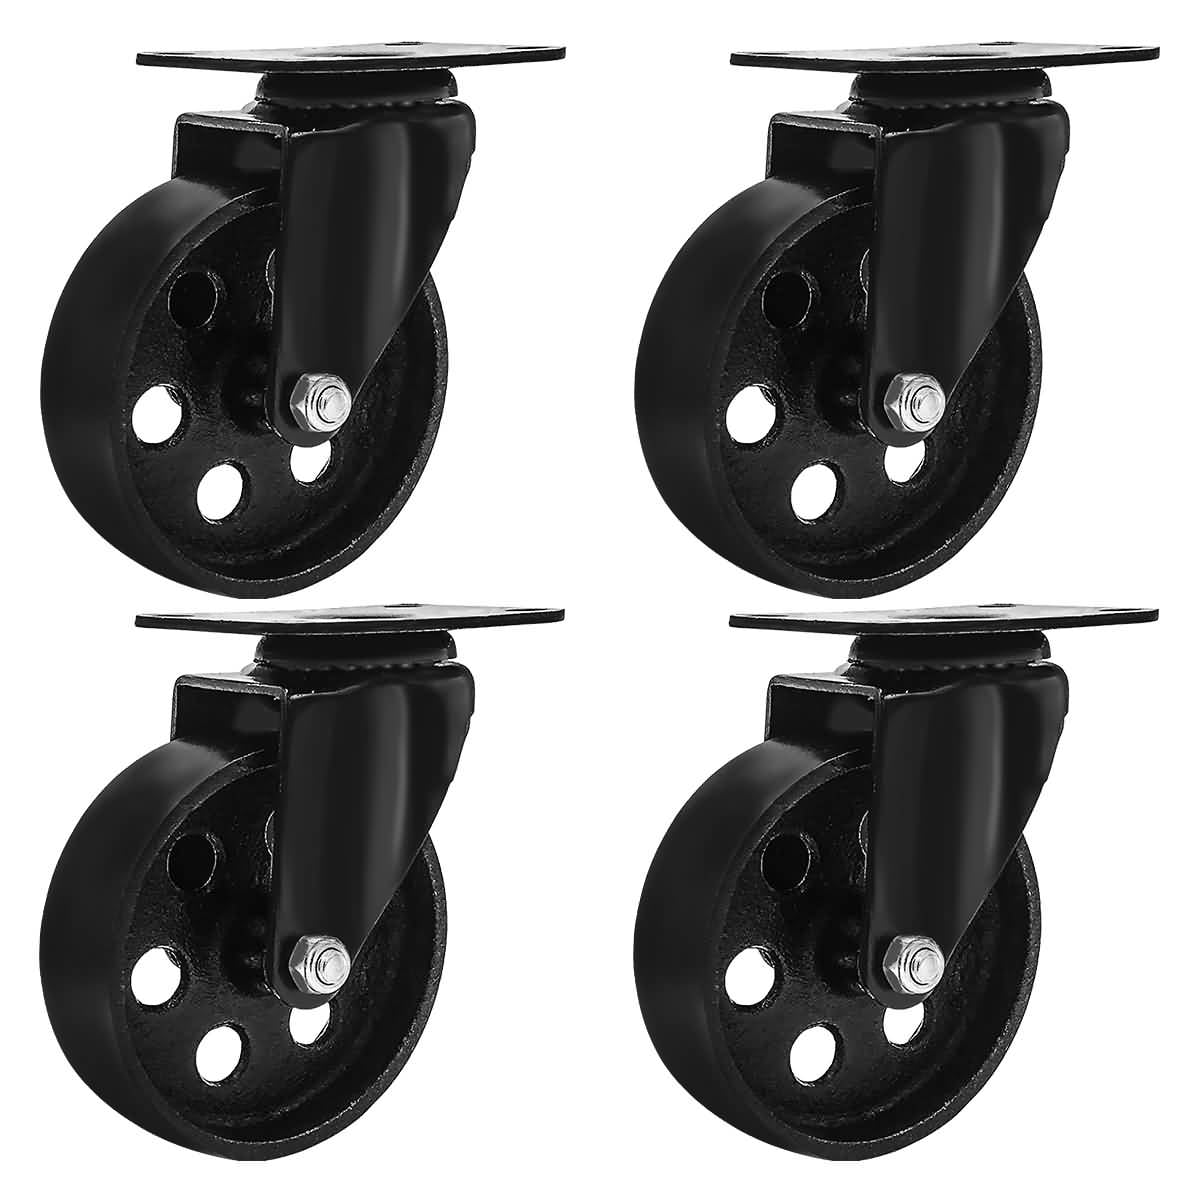 4 Pack 5" Vintage Caster Wheels Swivel Plate Black Iron Casters with Brake 